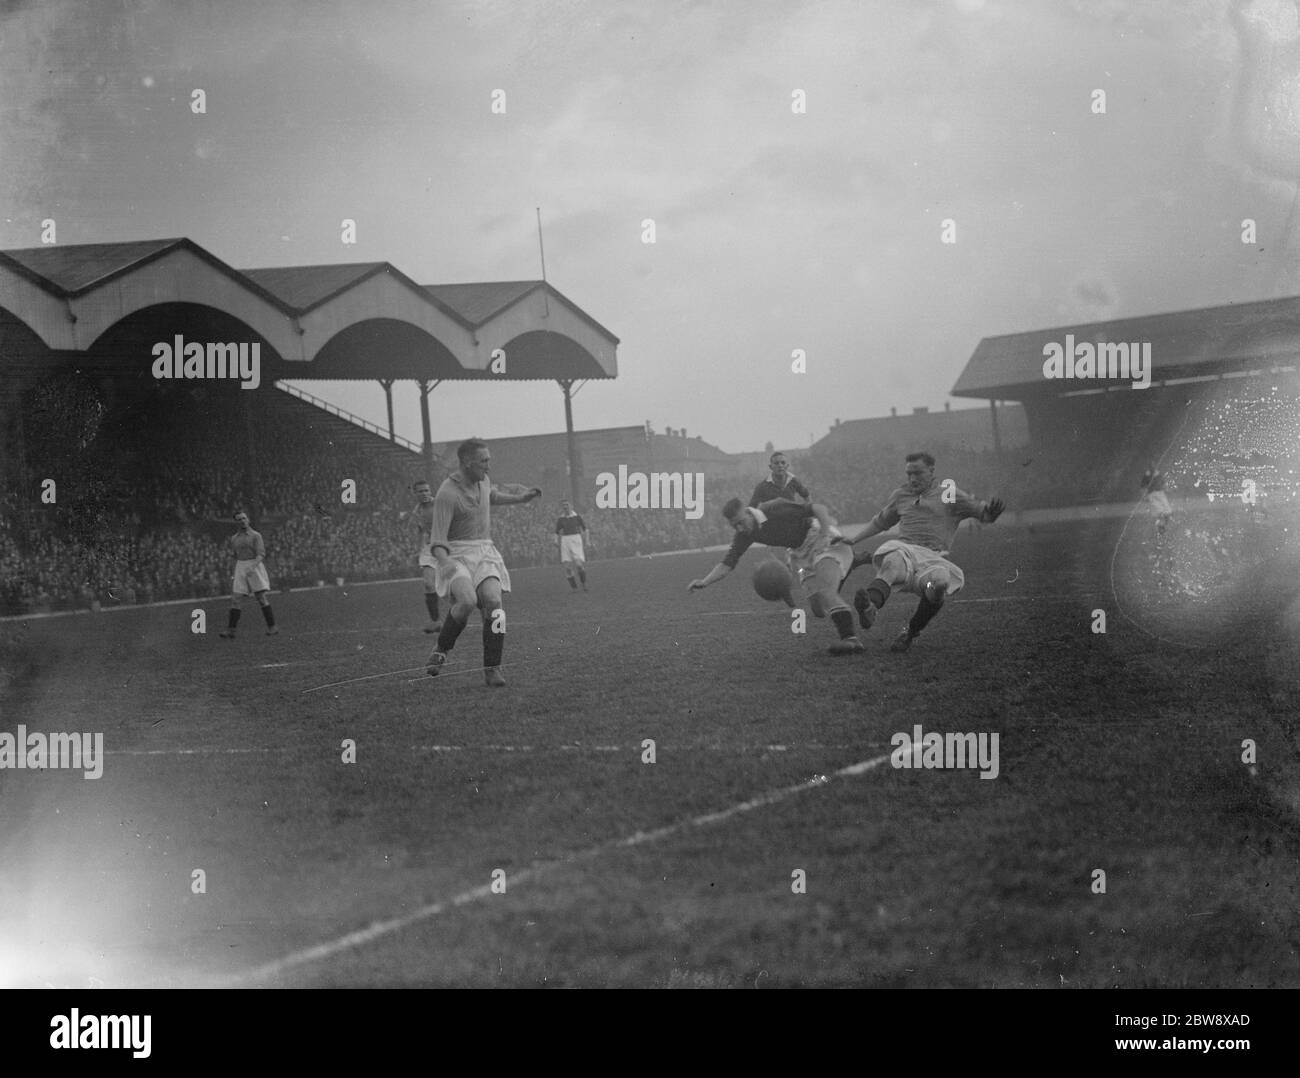 Nottingham Forest Football Club versus Charlton Athletic football club . two players compete for the ball . 10 April 1936 Stock Photo